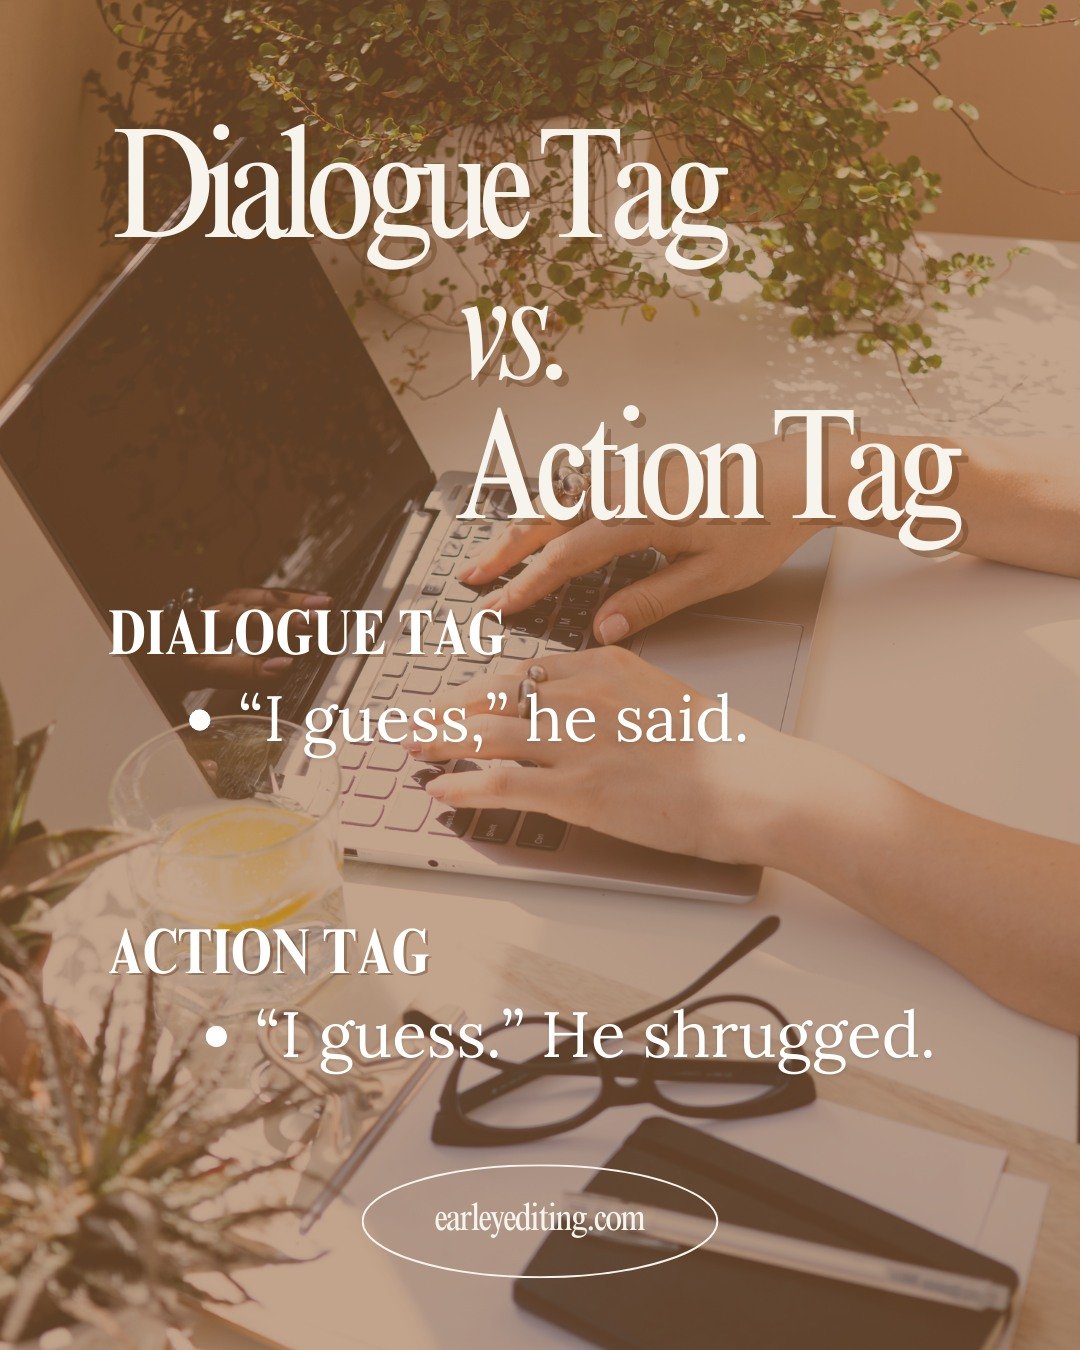 The grammatical differences between action tags and dialogue tags are subtle, but it makes all the difference in what you are conveying on the page!

Action Tag: &ldquo;I guess.&rdquo; He shrugged.
Dialogue Tag: &ldquo;I guess,&rdquo; he said.

Or a 